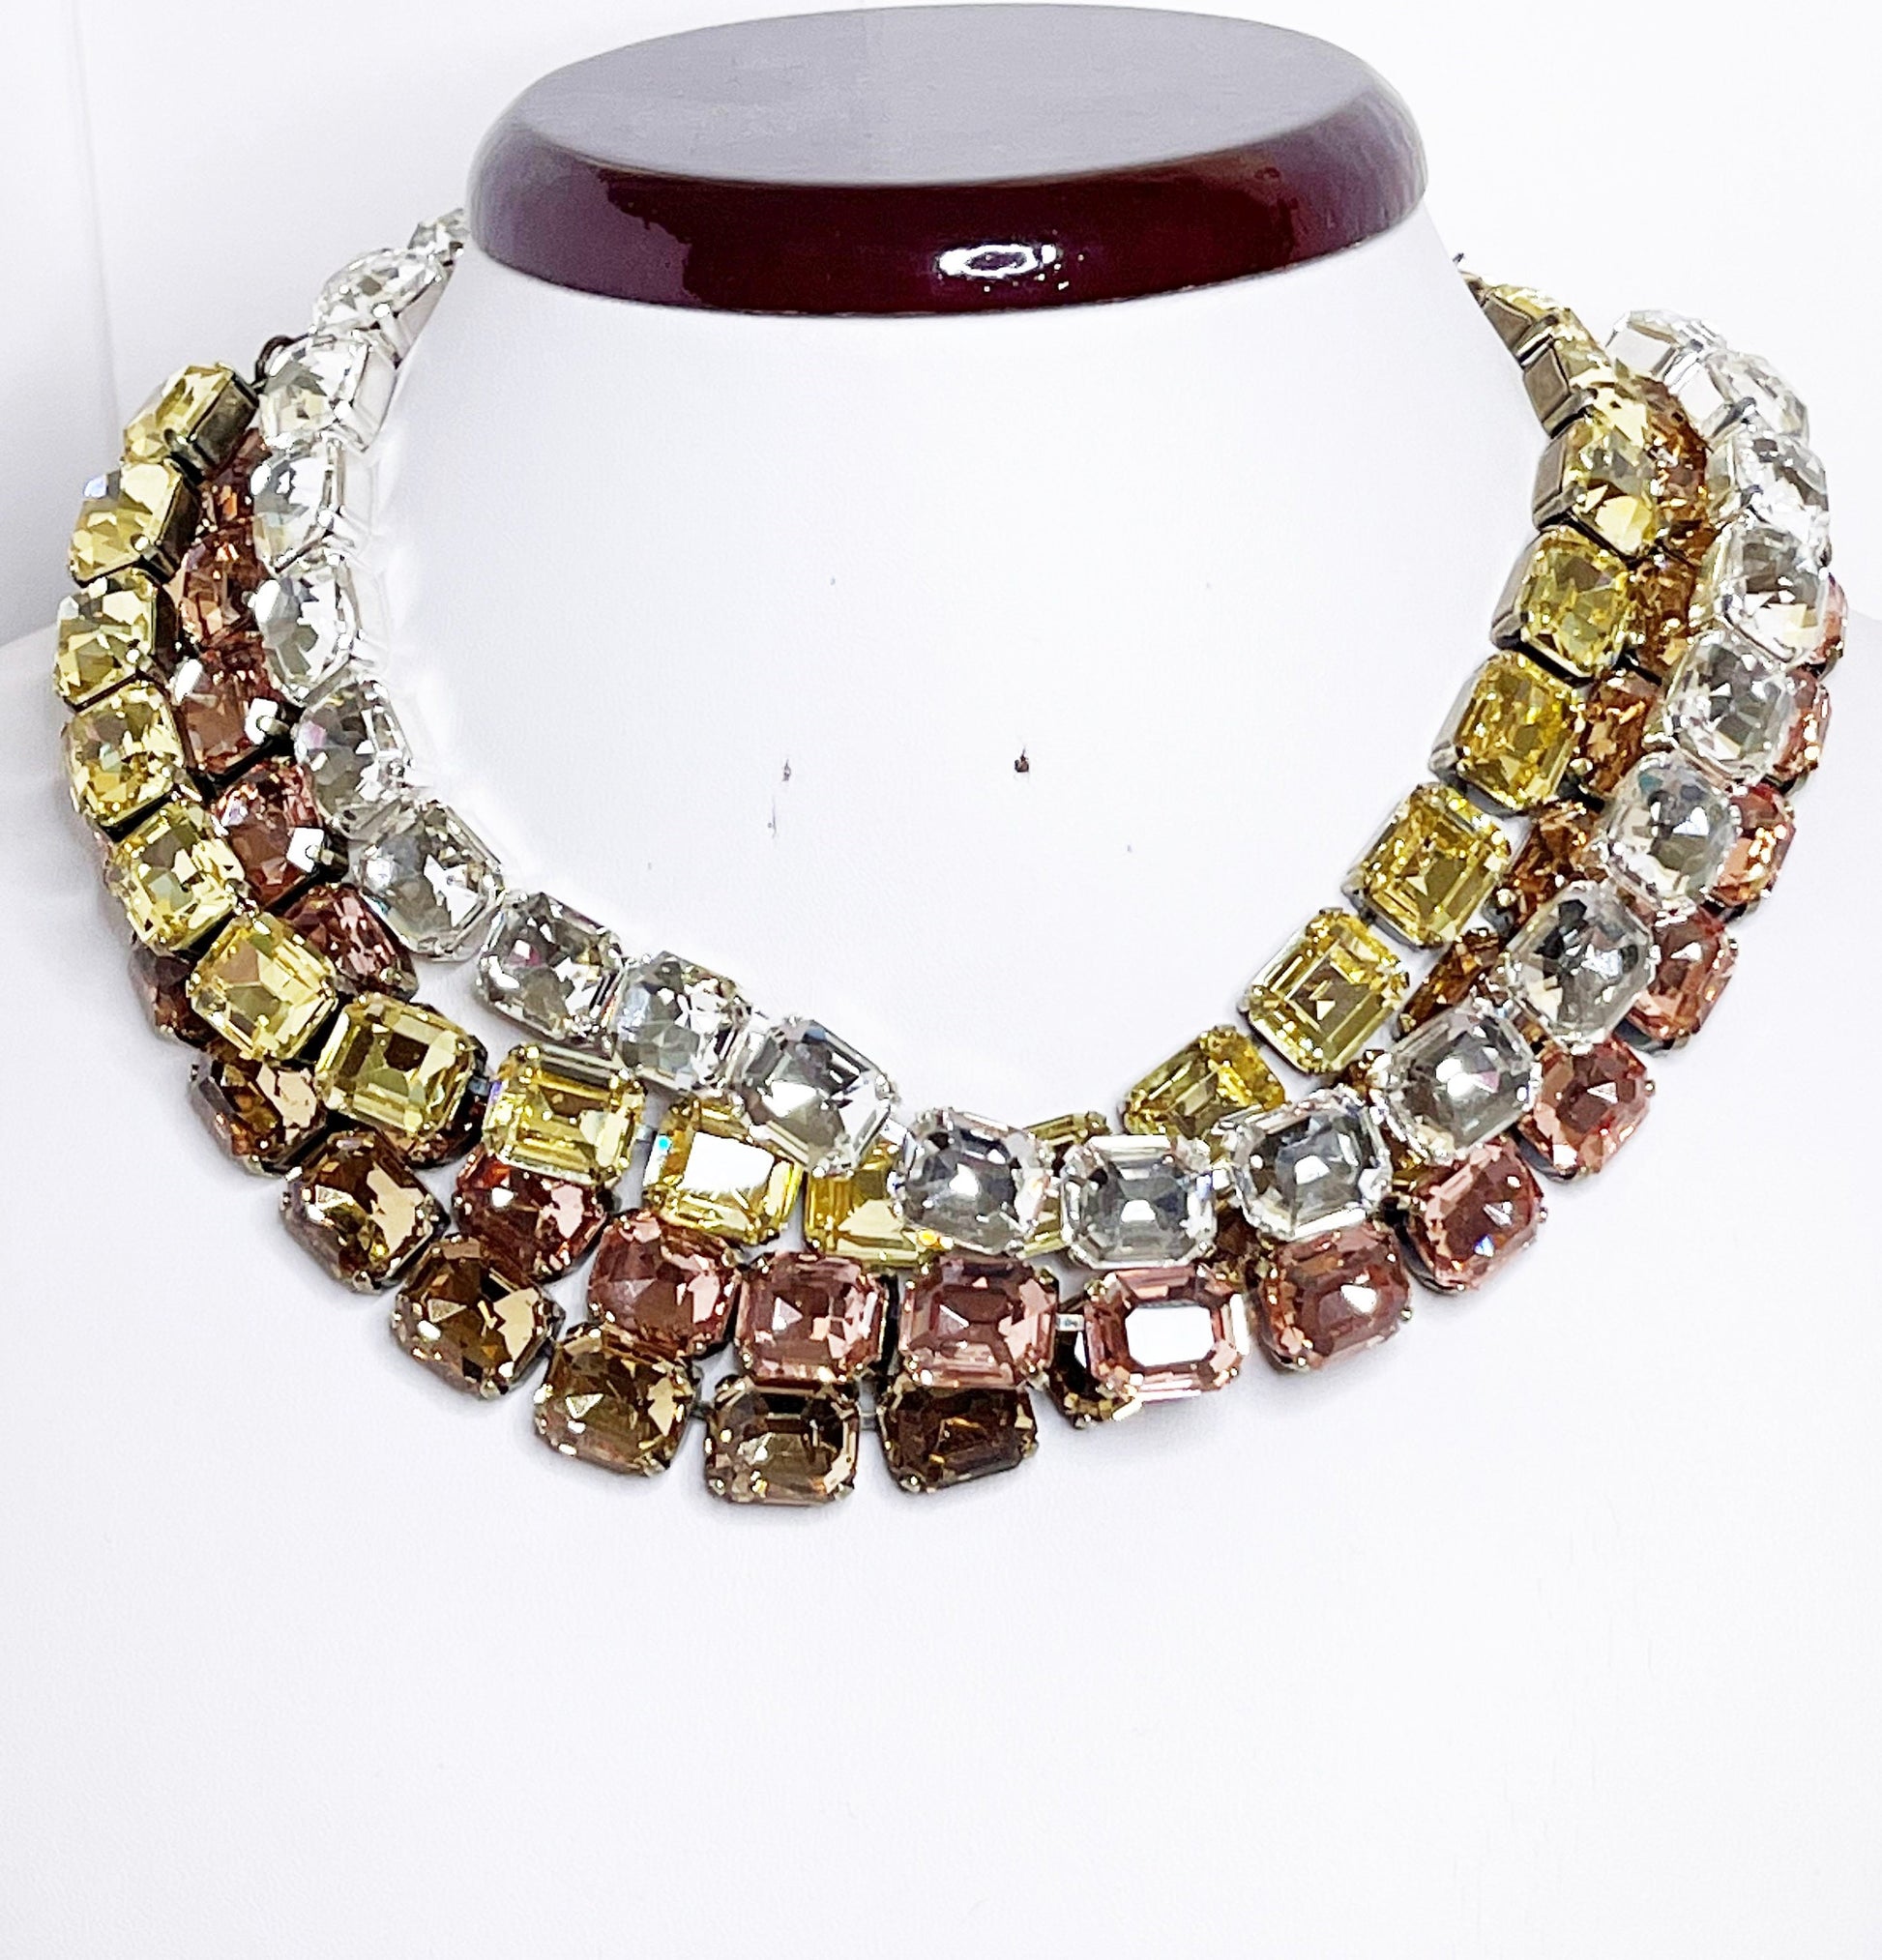 Yellow Peach Georgian Collet Necklace | Premium Crystal | Anna Wintour Style | Layering Chokers